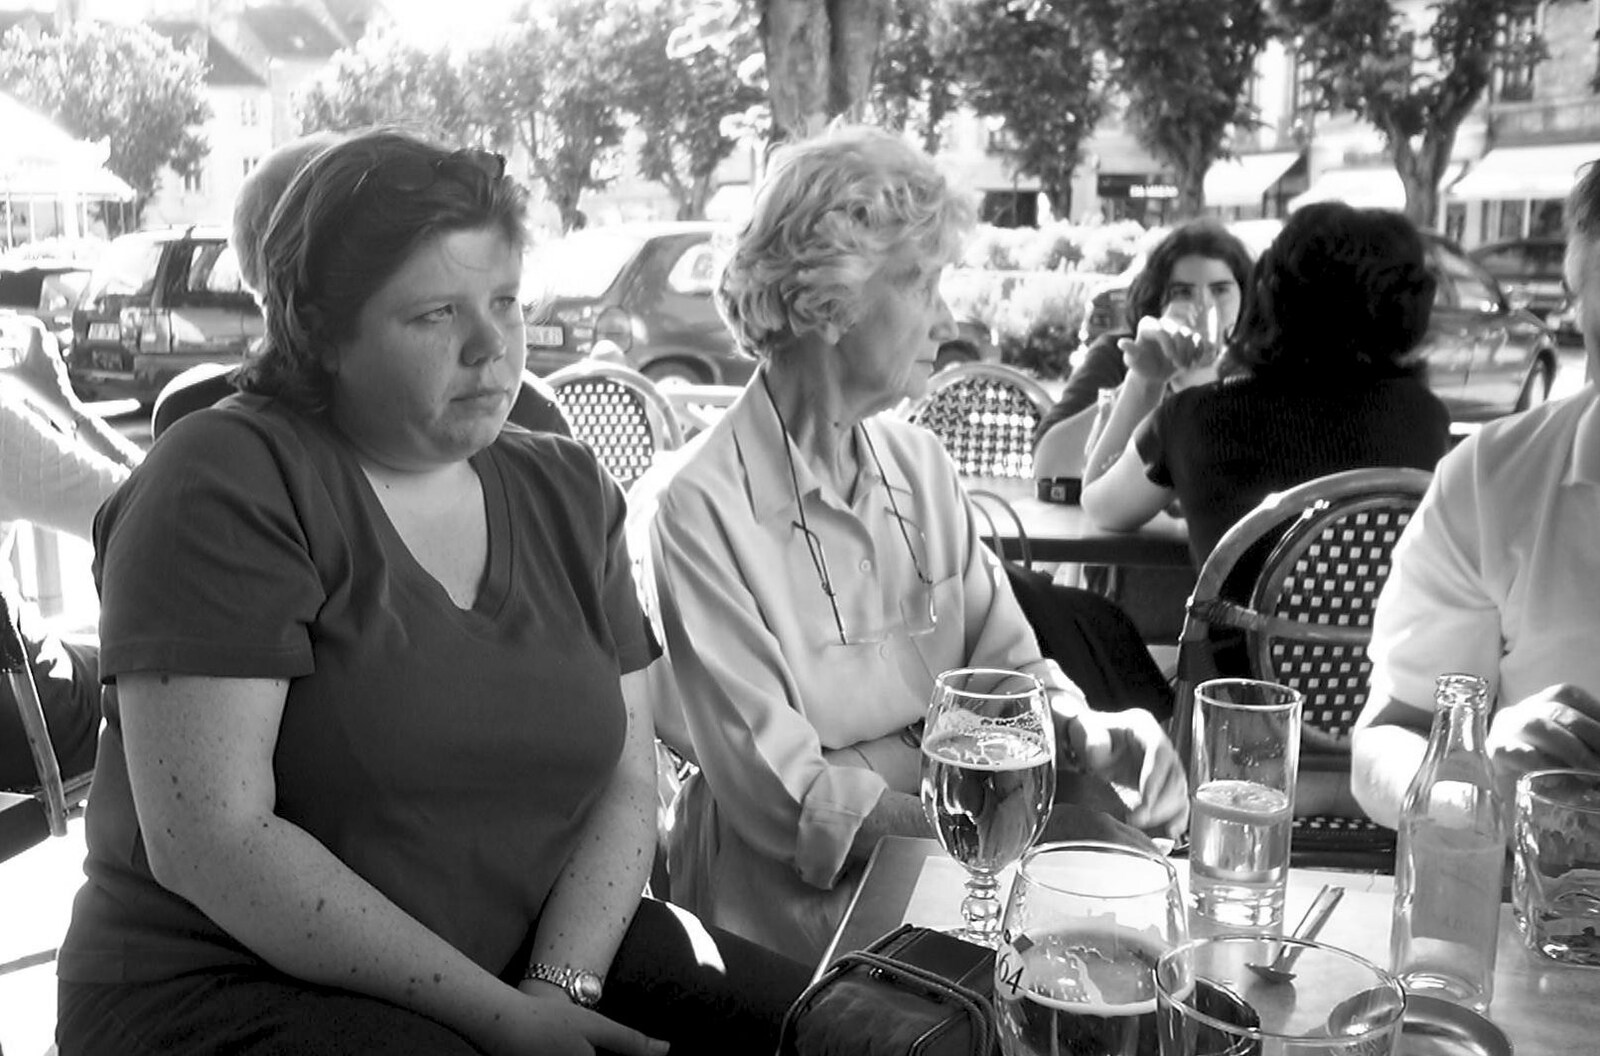 Sis and grandmother from A Short Holiday in Chivres, Burgundy, France - 21st July 2001